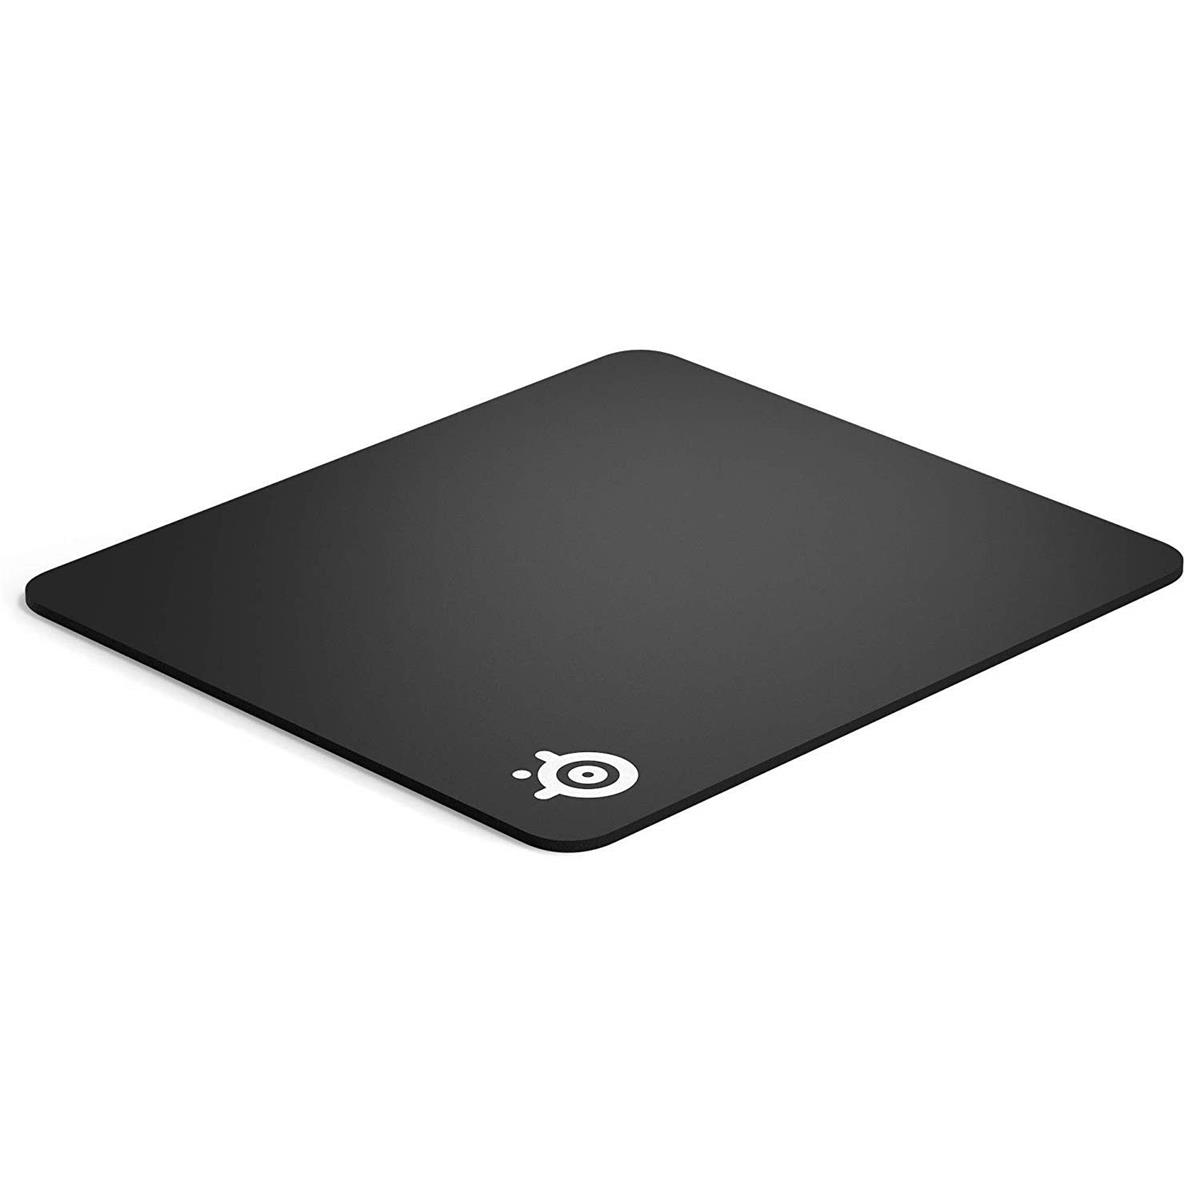 Image of SteelSeries QcK Heavy Gaming Mouse Pad